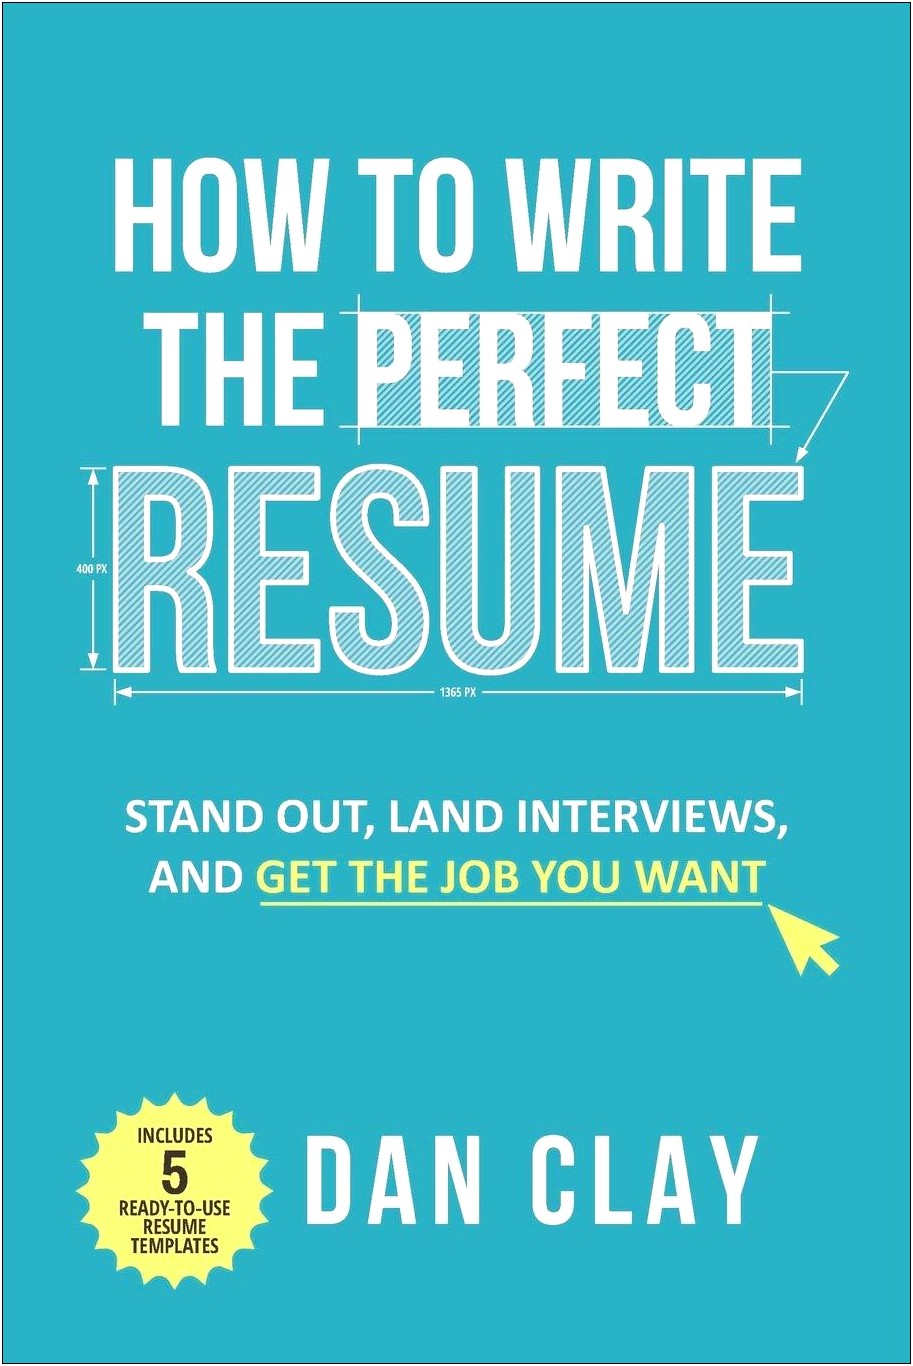 Howto Write A Resume For Jobs